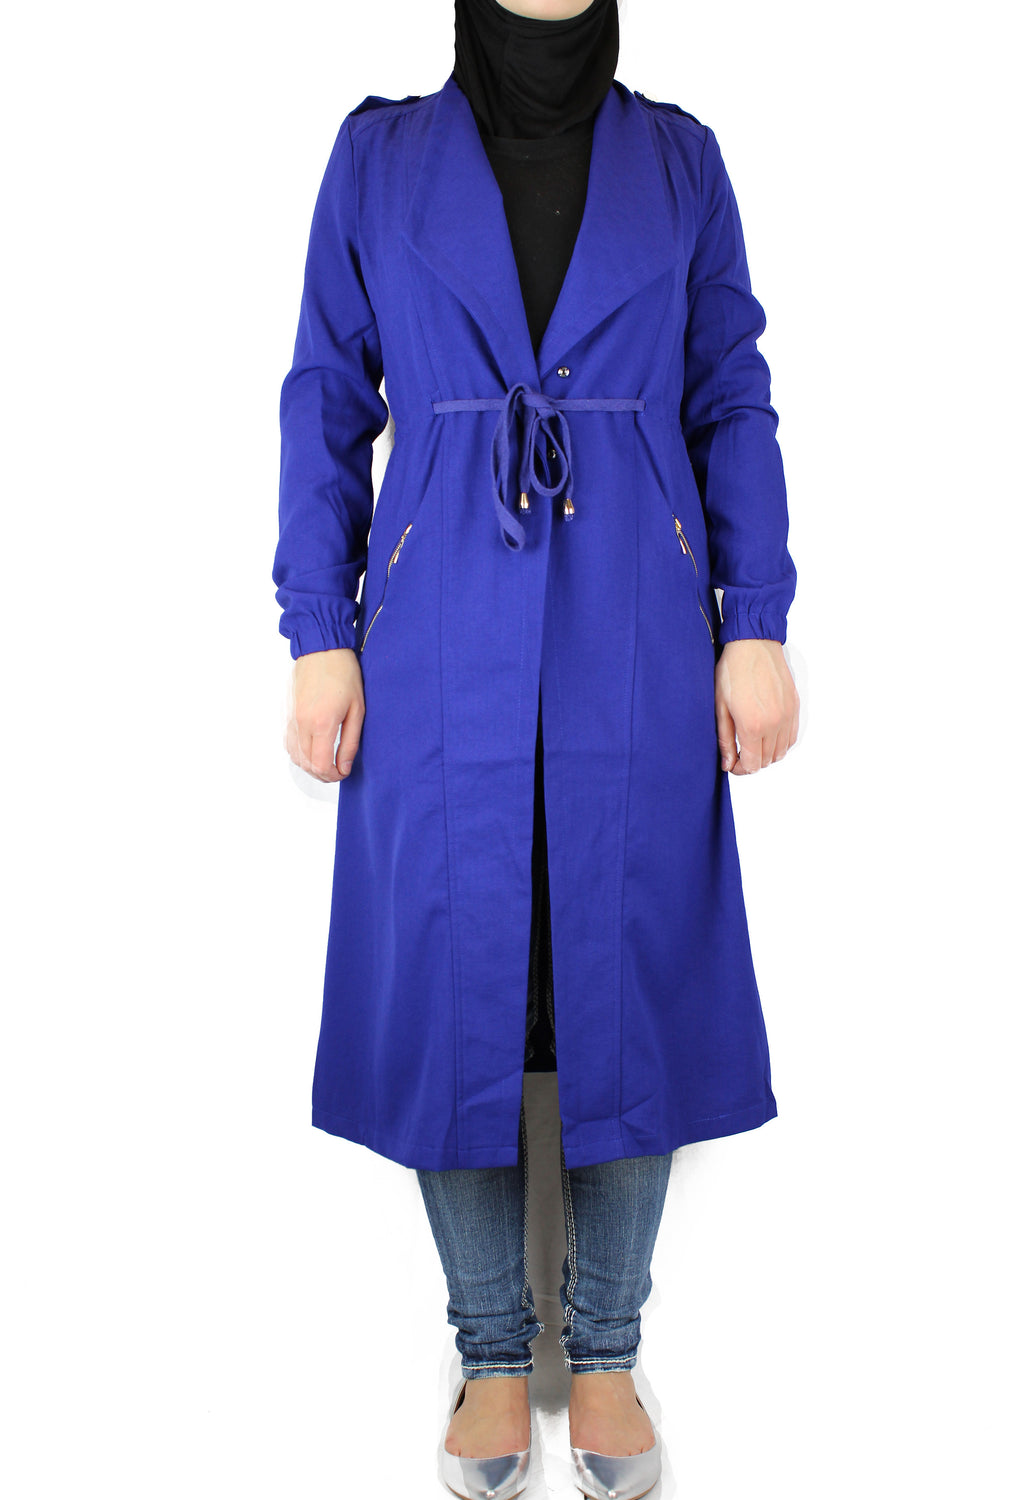 royal blue open front long sleeve cascade jacket with pockets and zipper closures with a waist tie